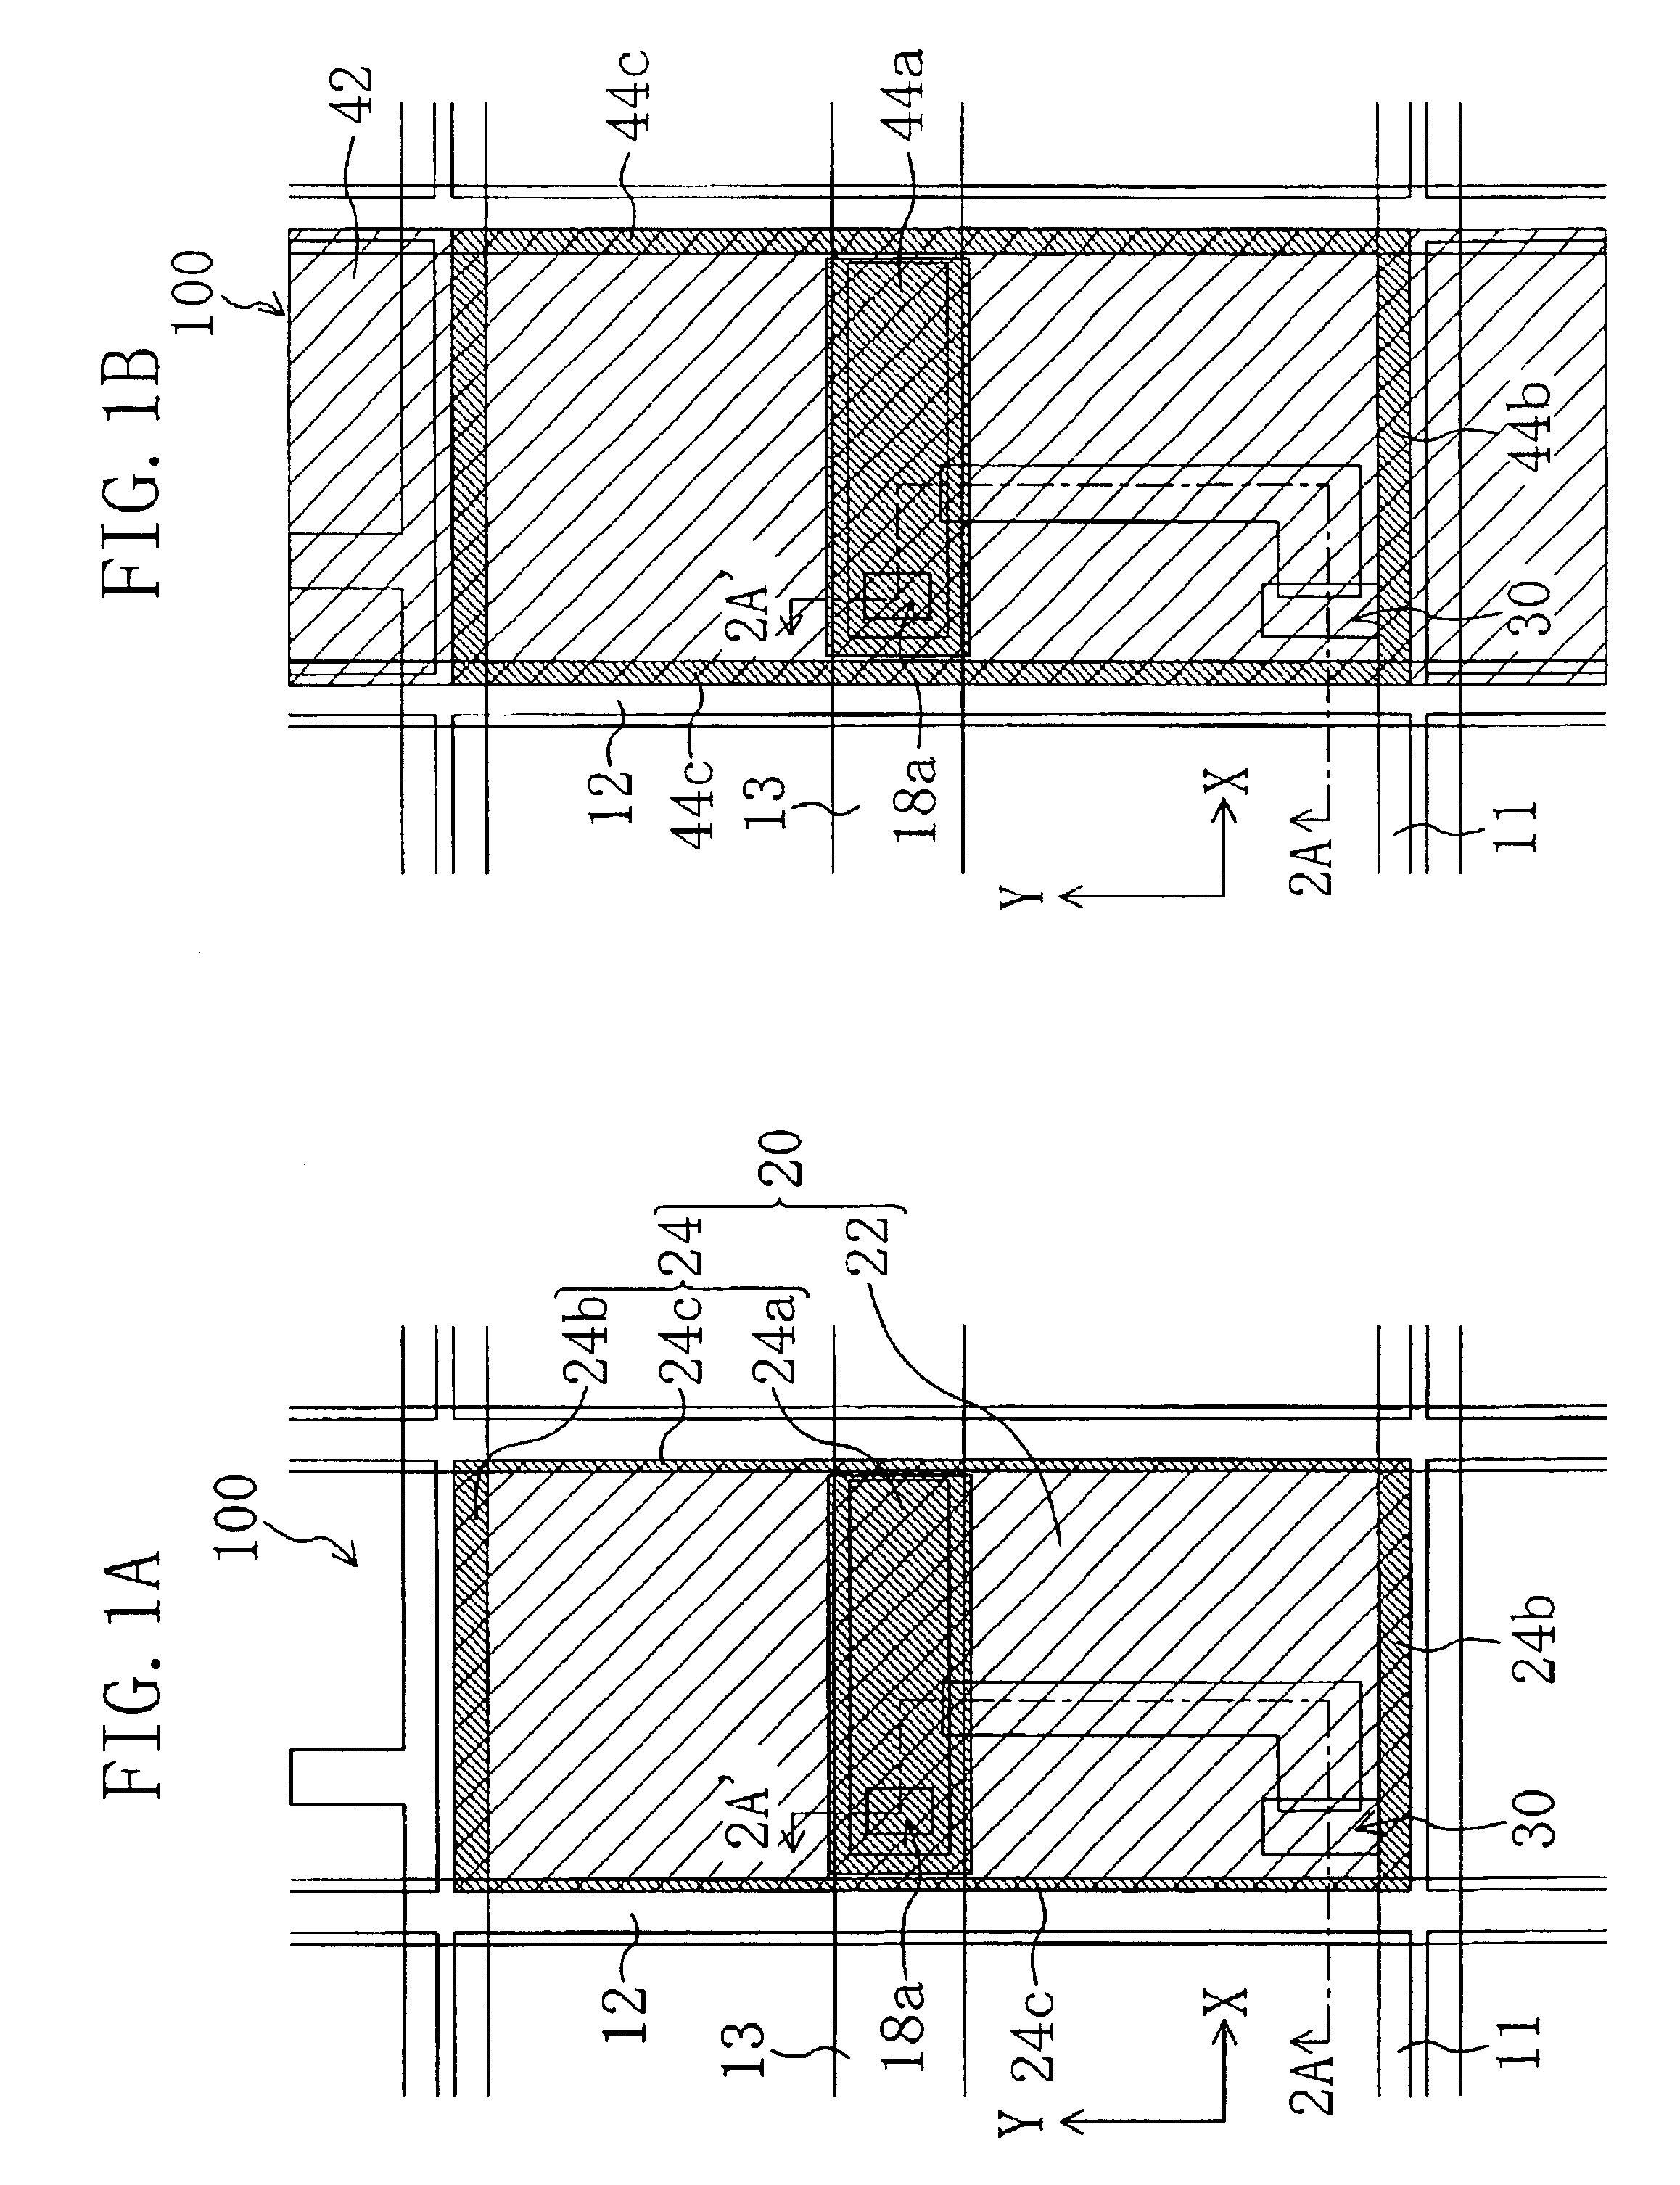 Transflective liquid crystal display device with substrate having greater height in reflective region